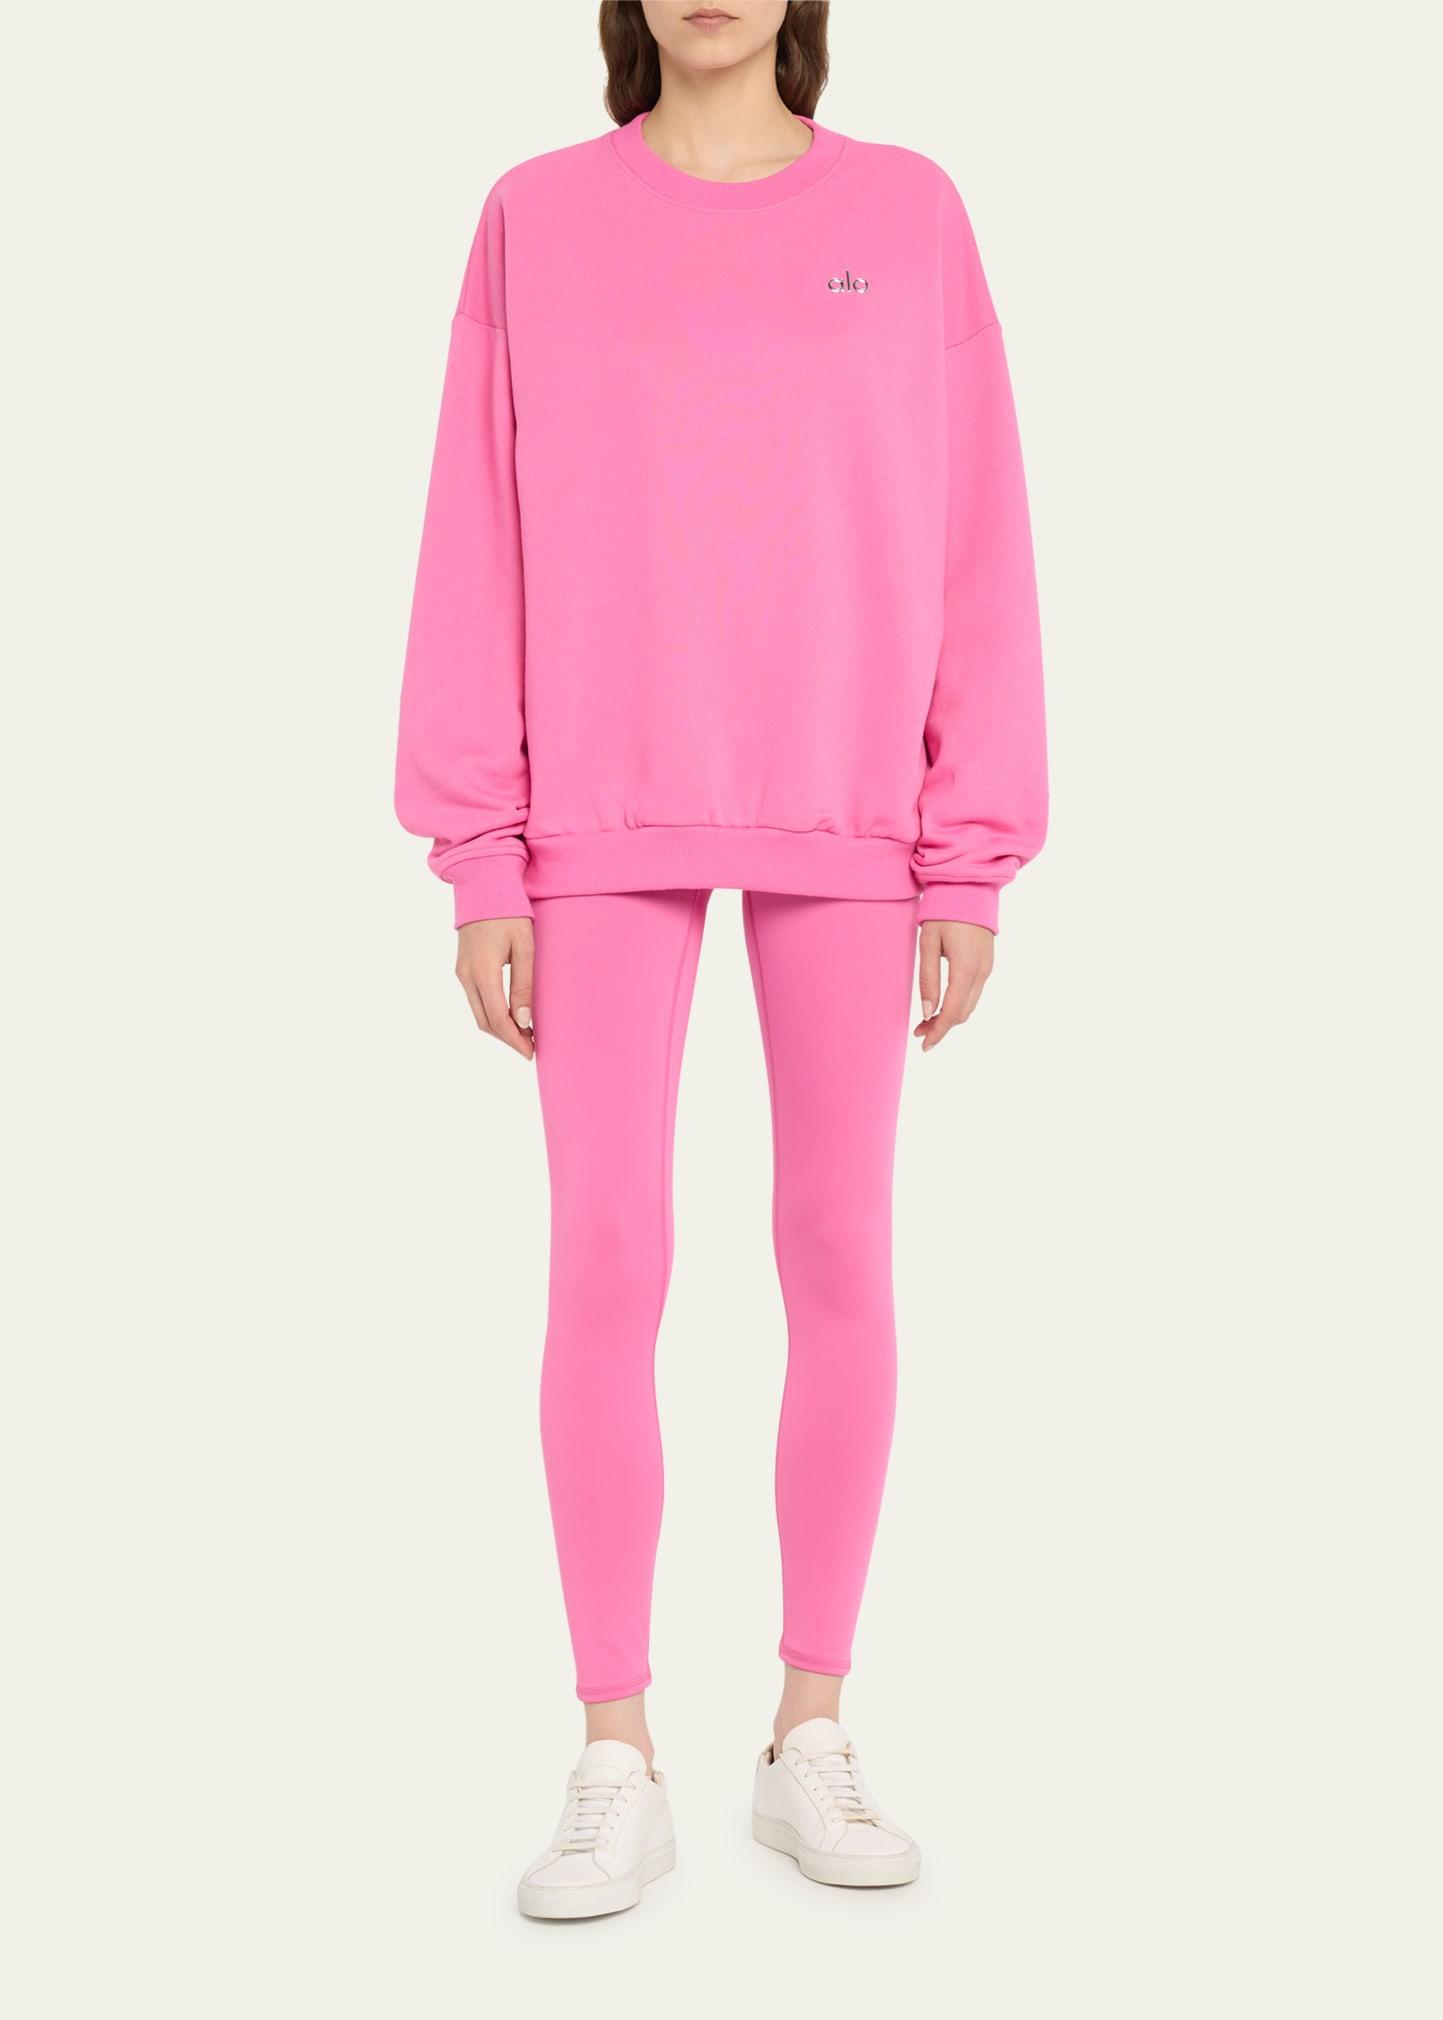 Alo Yoga Accolade Crewneck Pullover in Pink | Lyst